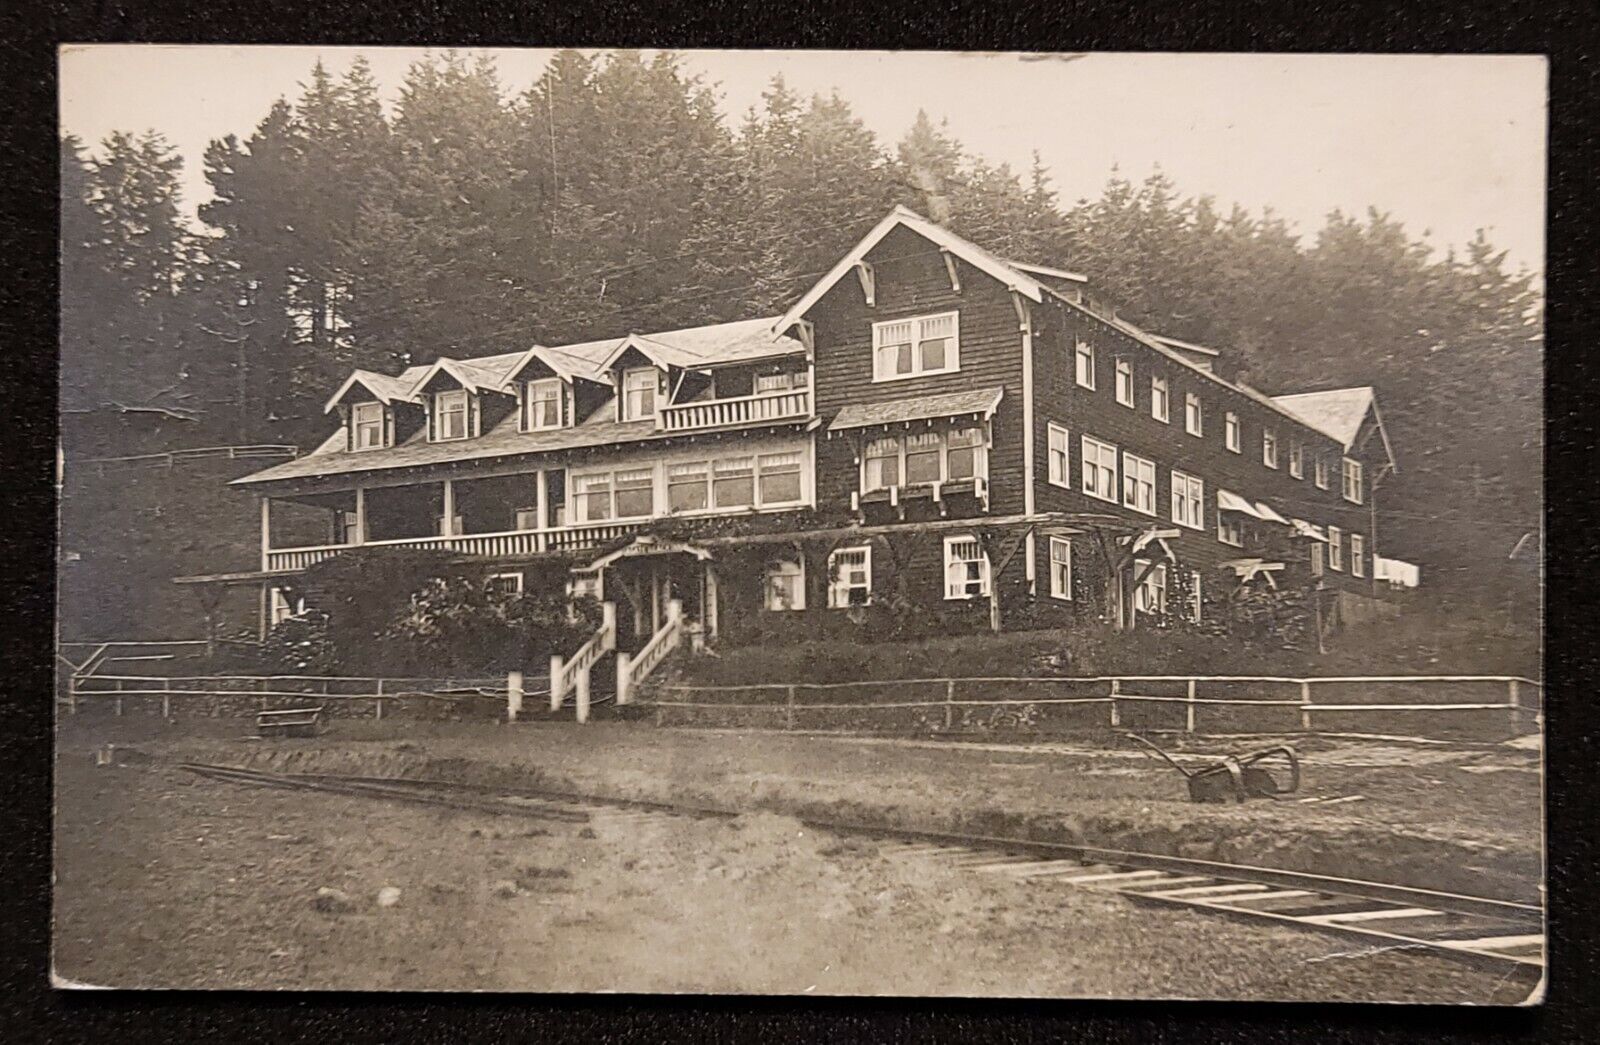 R.P.P.C. of Hotel in Marshfield, Oregon. 1920's (Coos Bay)